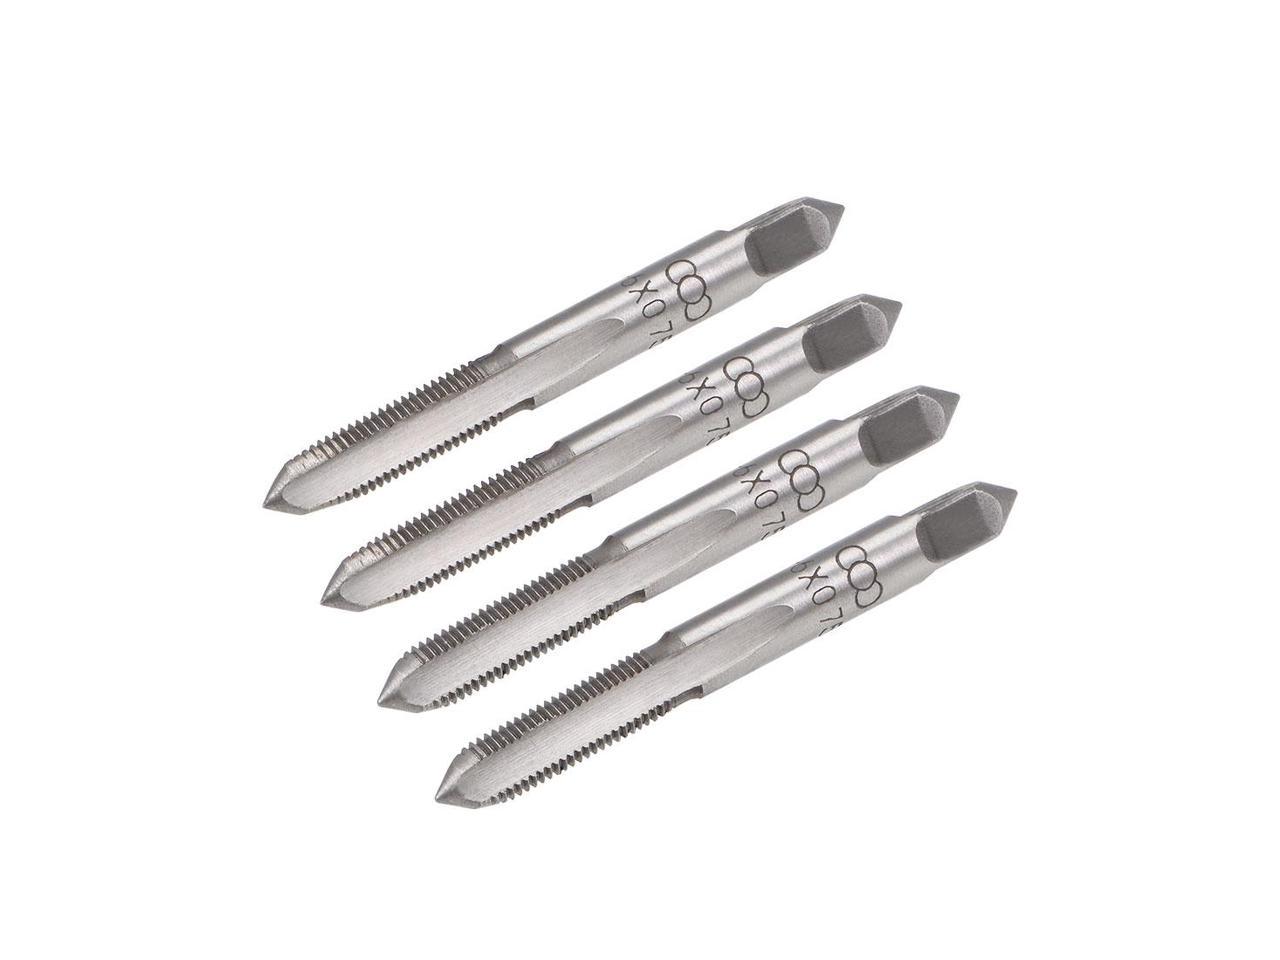 Hand Tap Alloy Steel Thread M6 To M24 Pitch 0.75 To 2mm 4&3 Flute H2 Tool 1&2 pc 